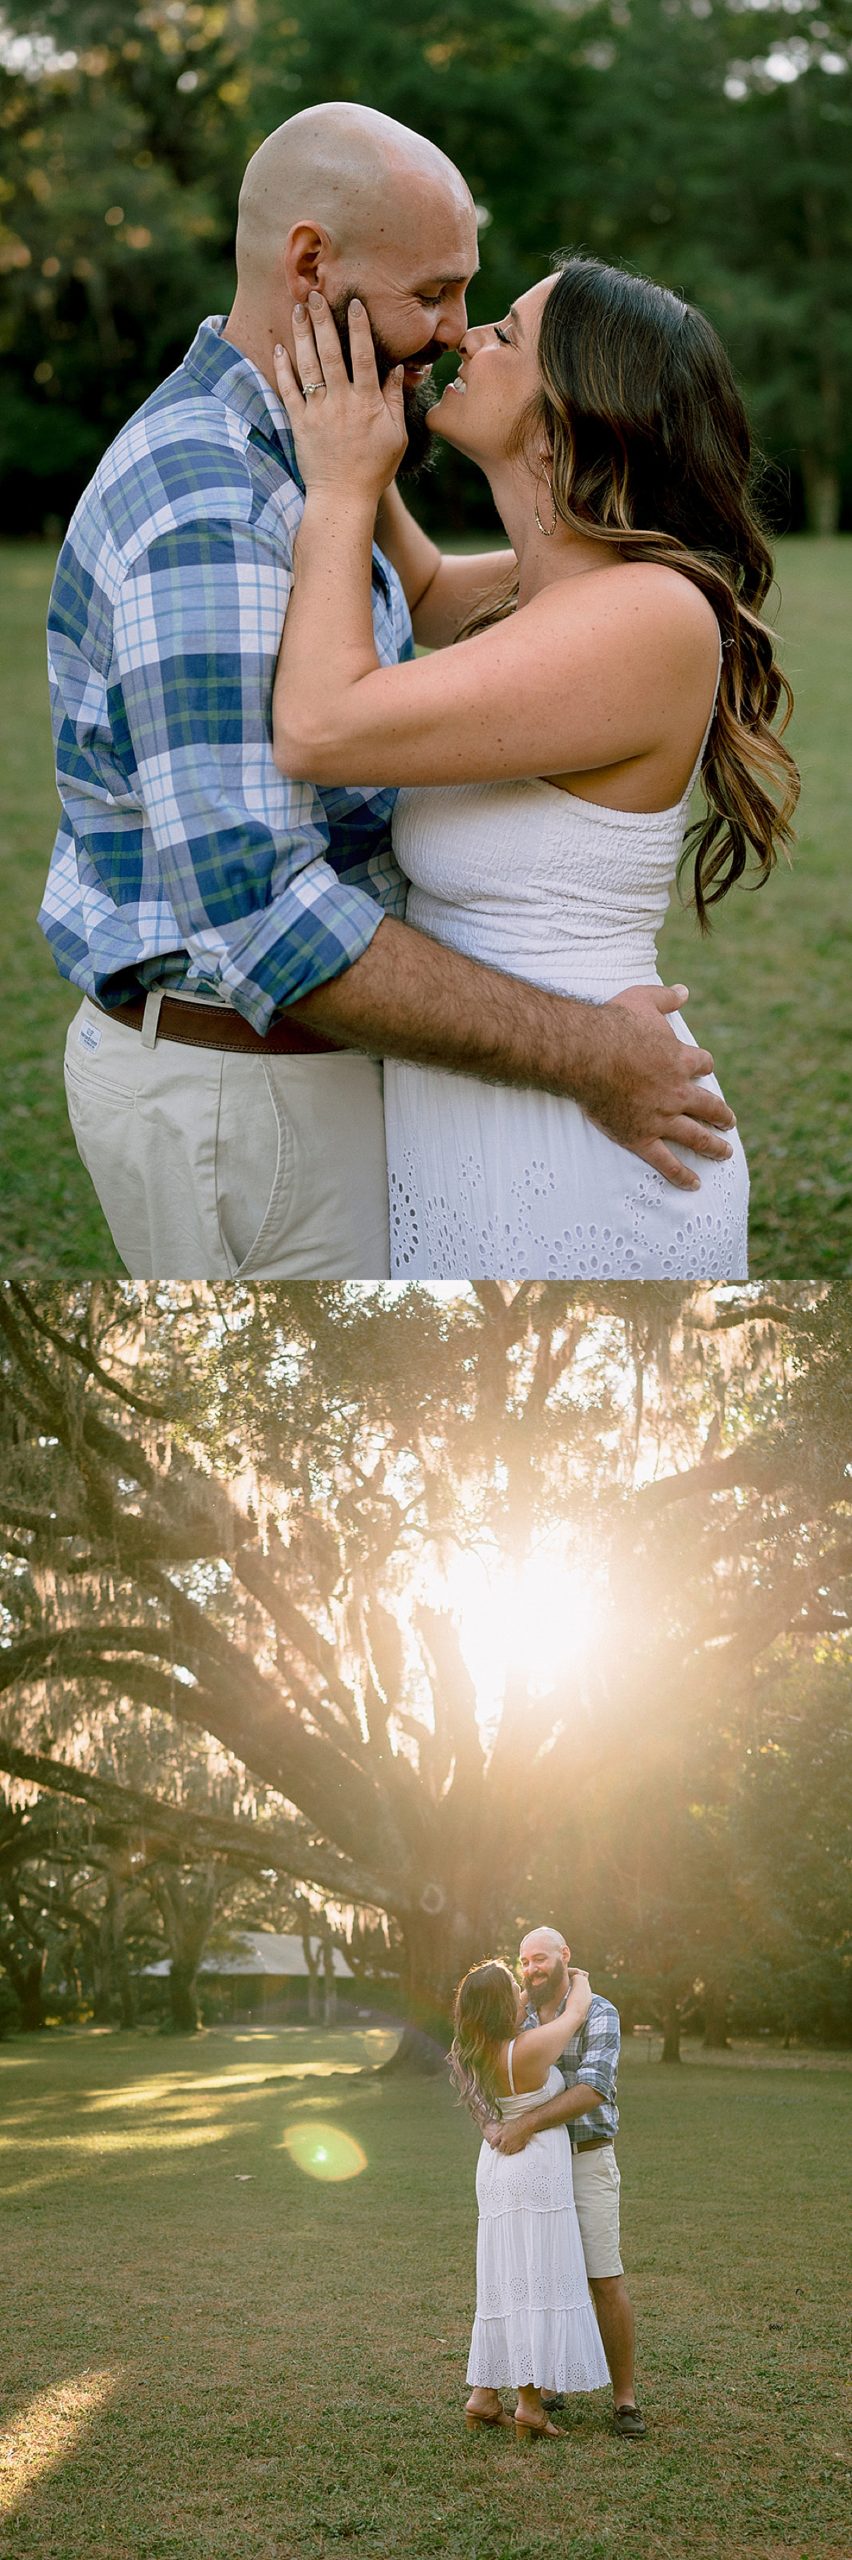 woman kissing mans face and sunset underneath florida trees during 30a engagement session 